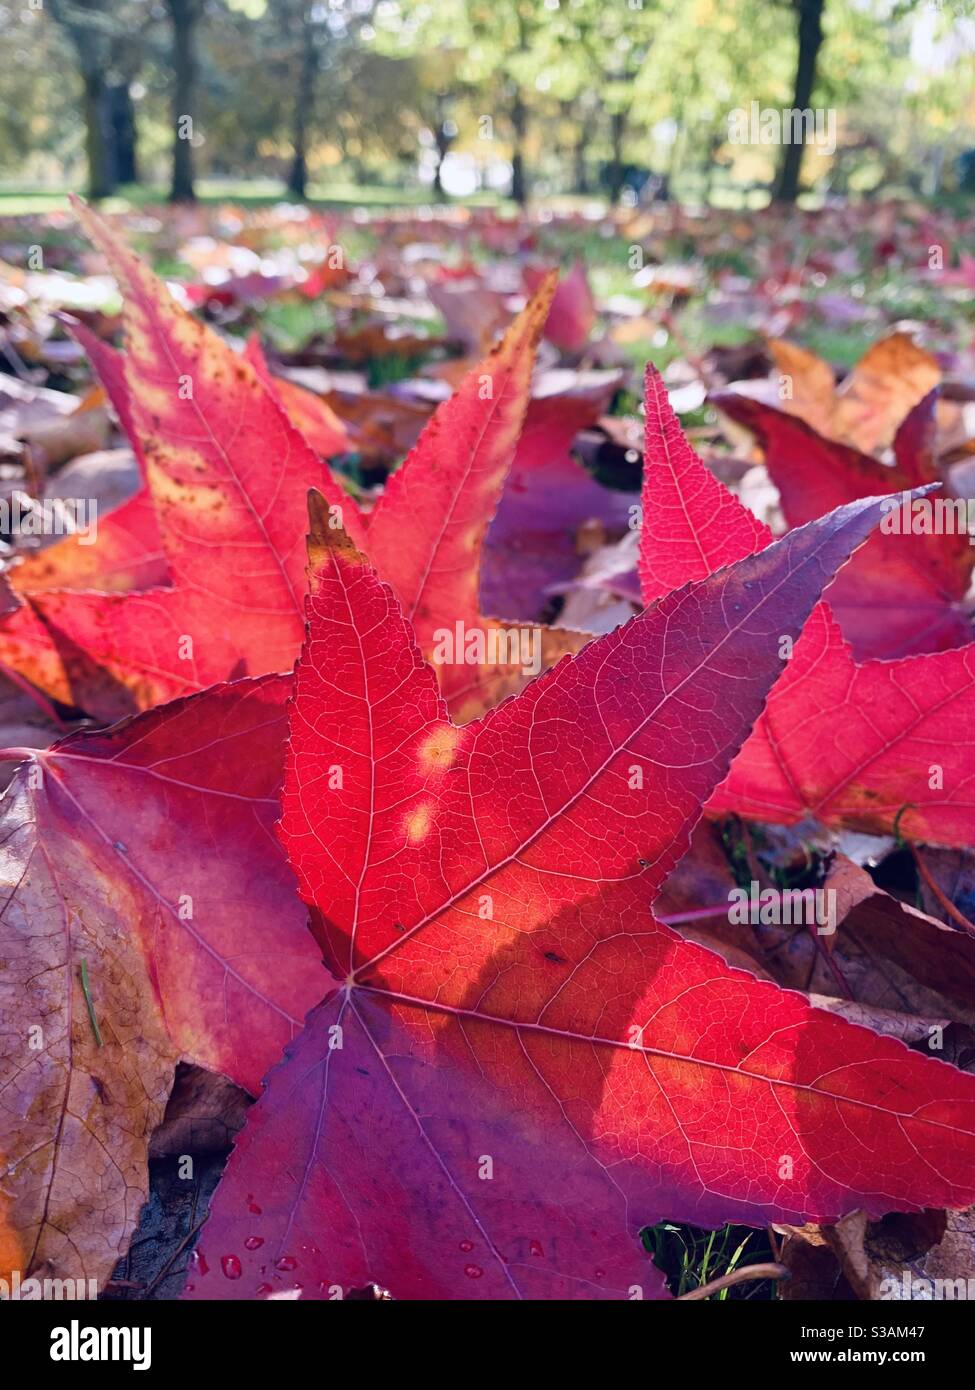 Bright pink star shaped maple autumn leaves on the ground Stock Photo